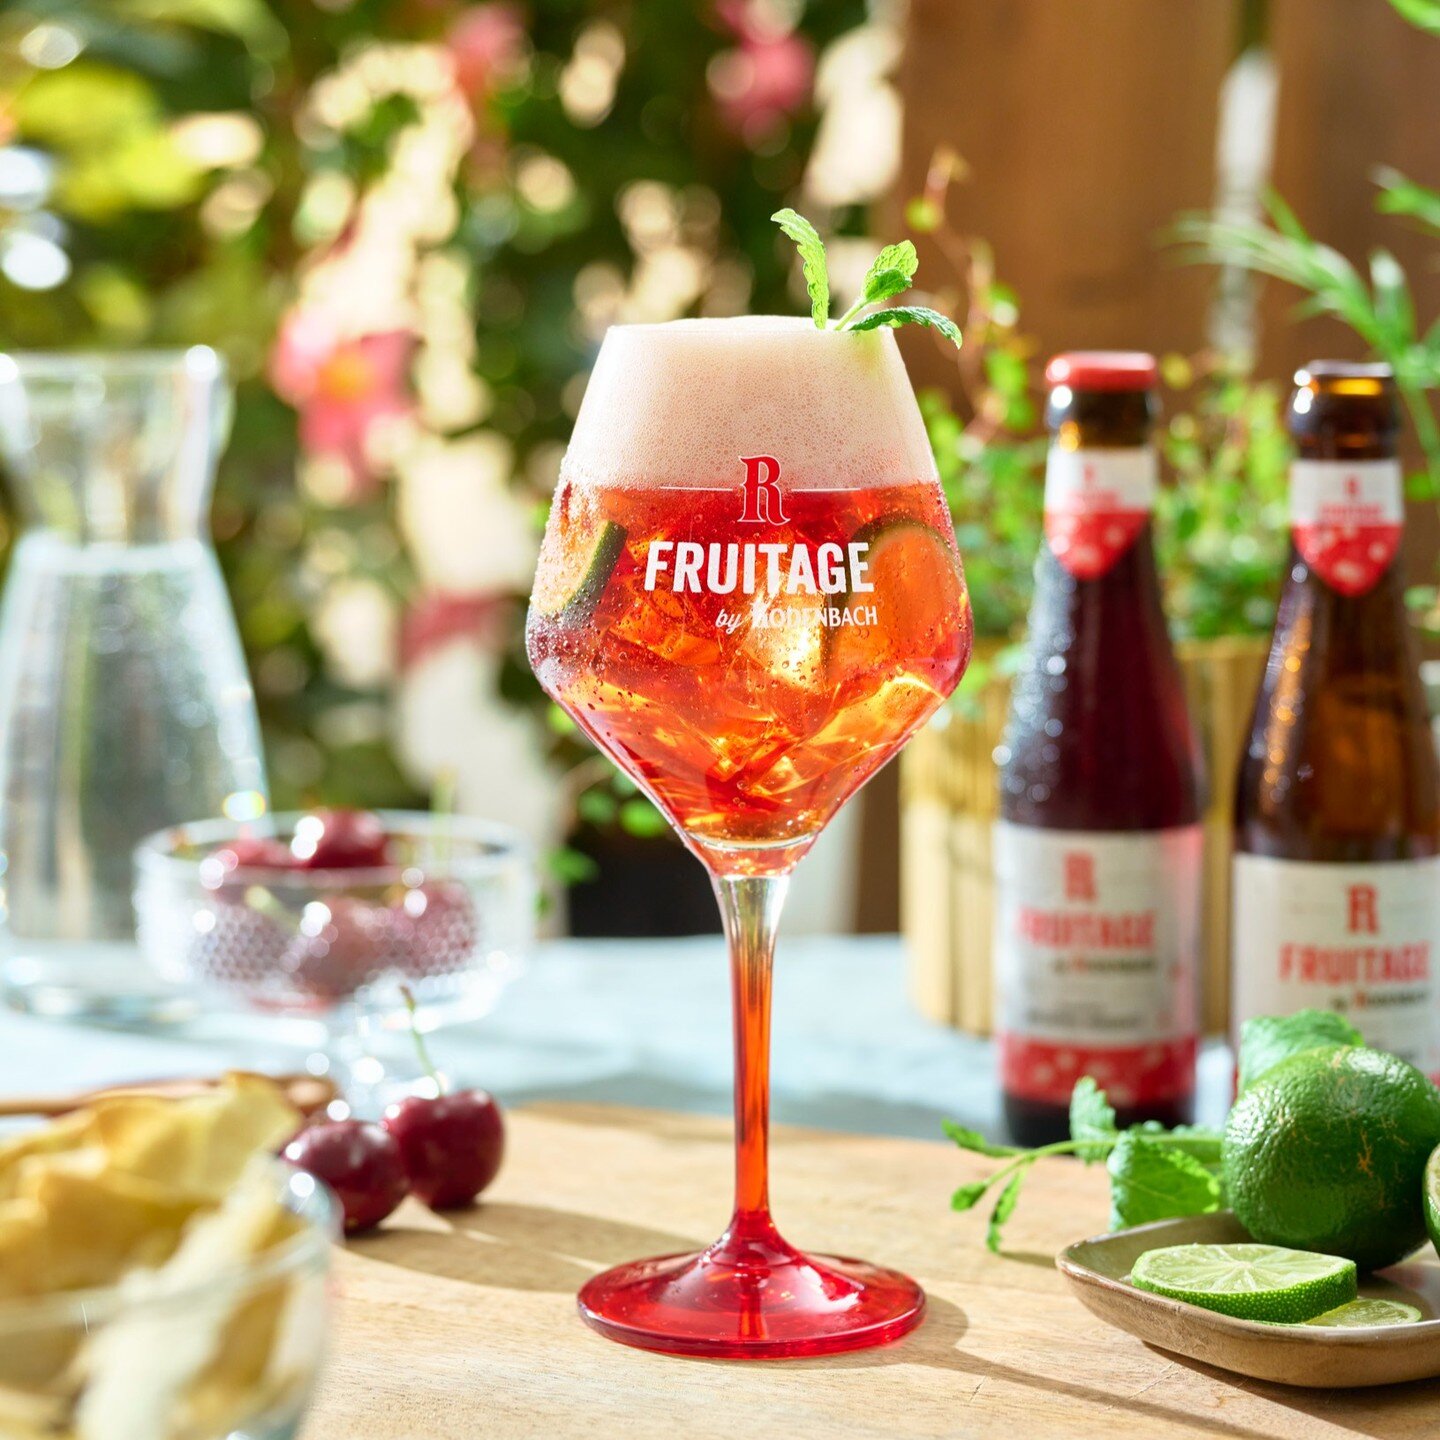 Together with @kosmanalexander we created mouthwatering new video and photography for @fruitagebyrodenbach